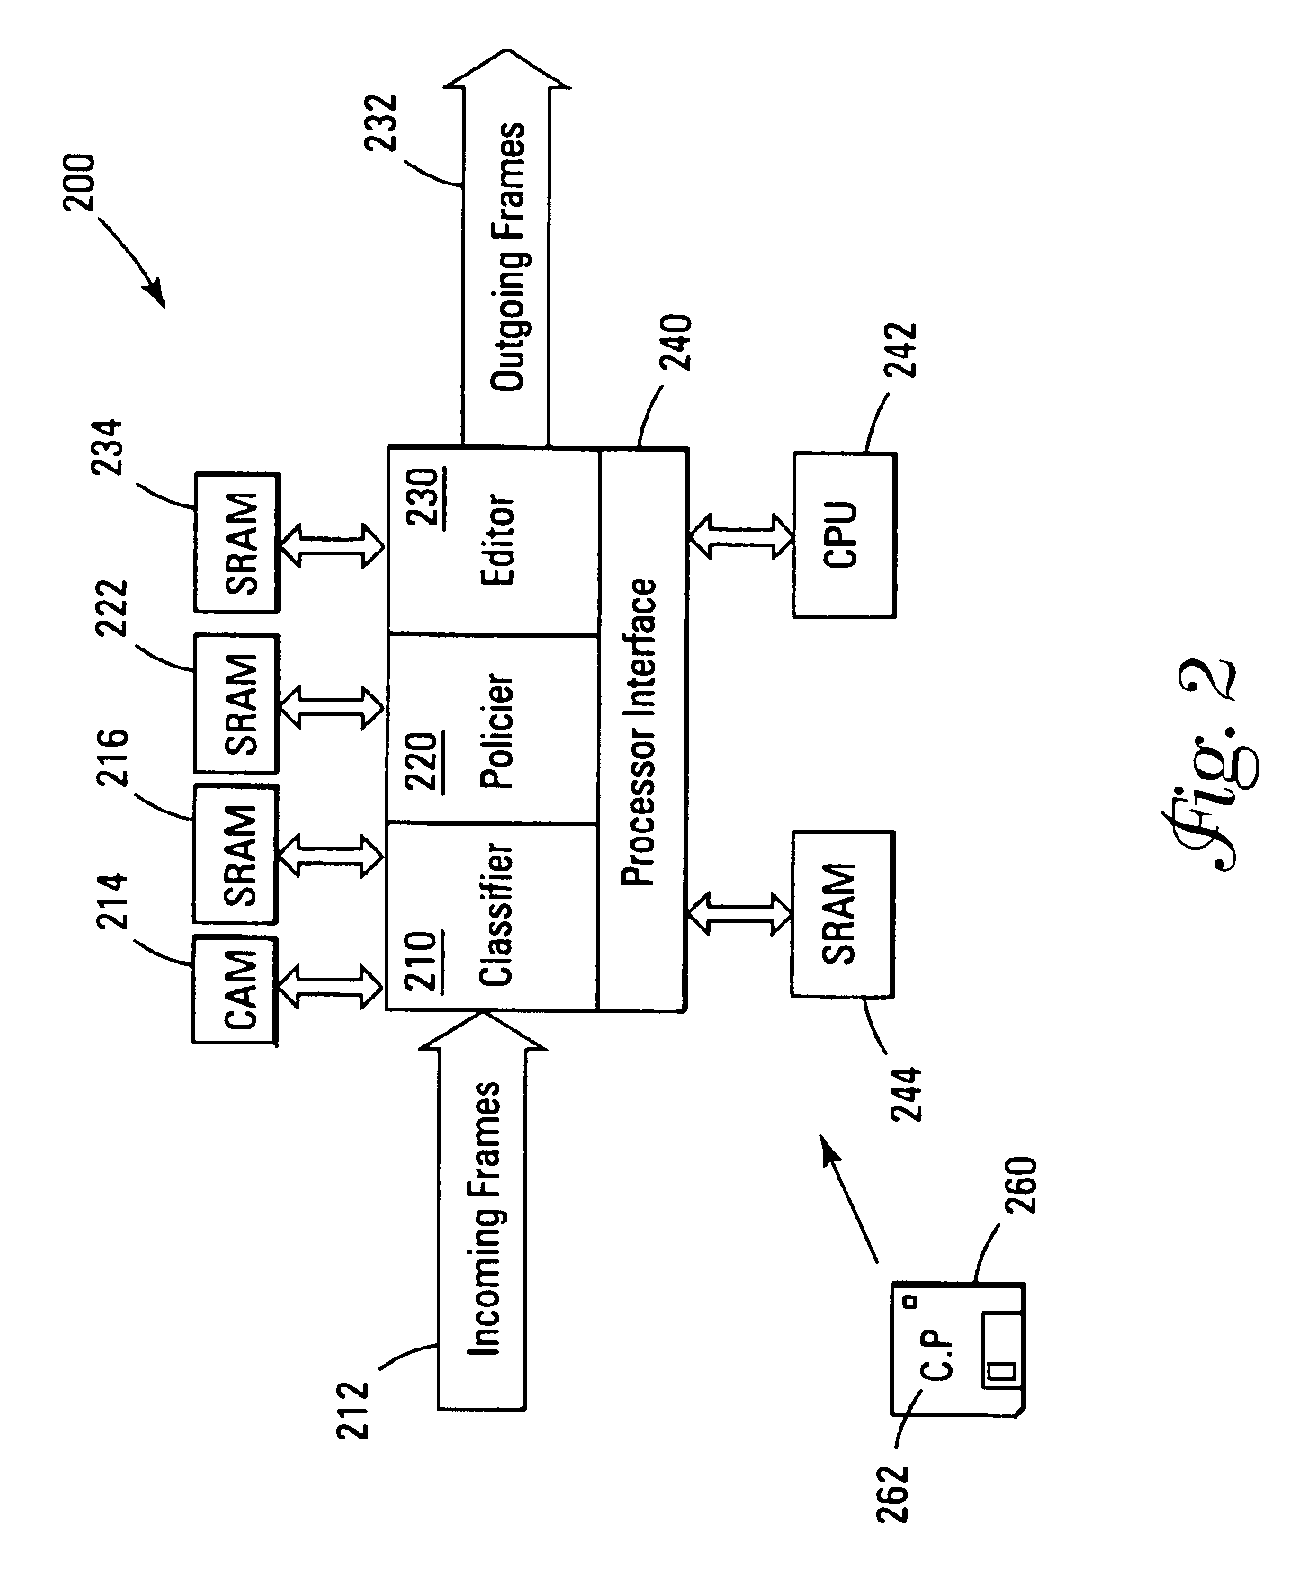 Method and apparatus for providing multi-protocol, multi-stage, real-time frame classification